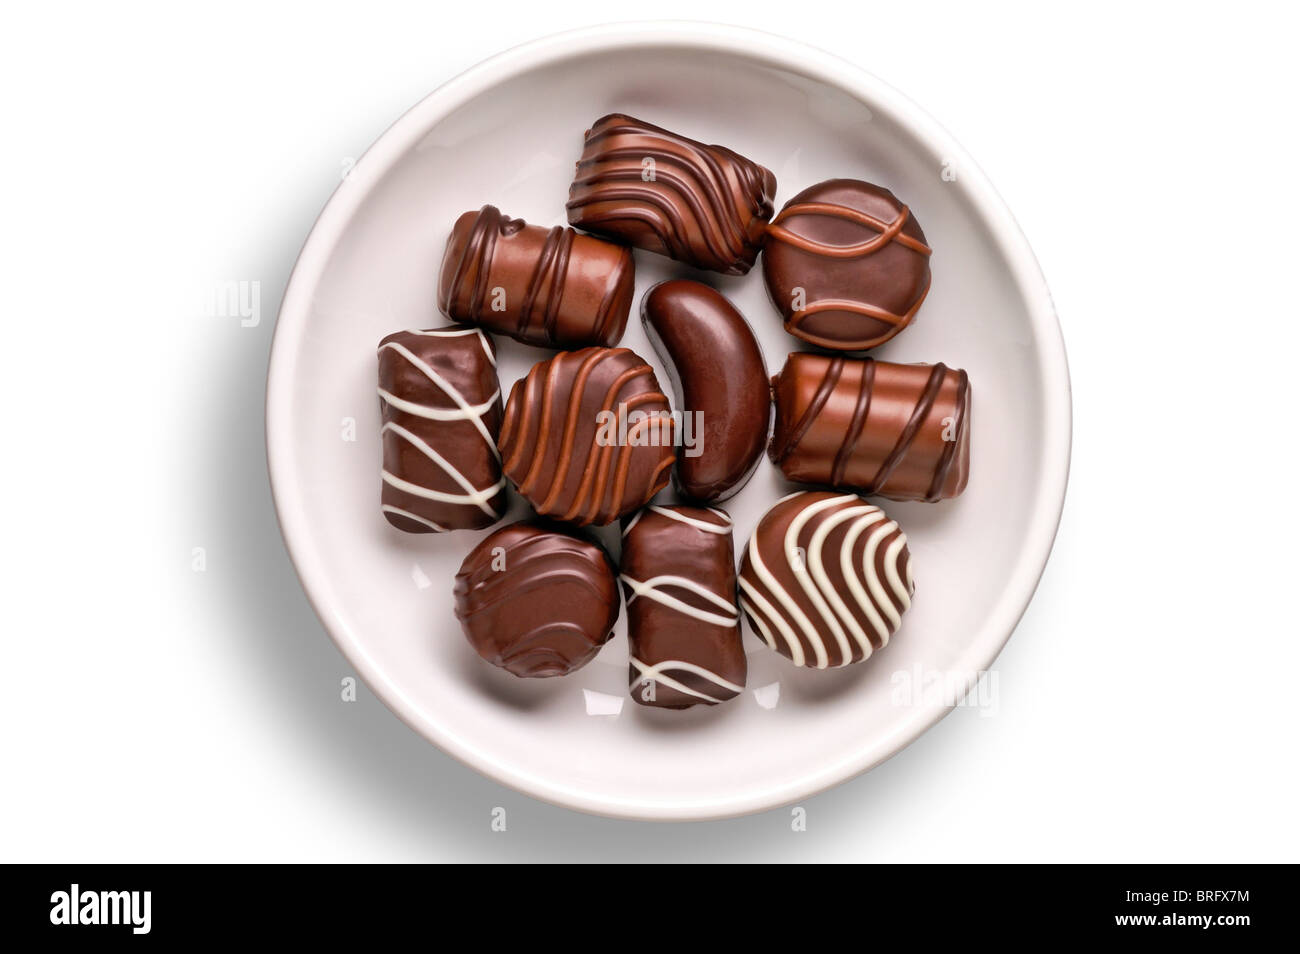 Chocolate candies in a dish with clipping path Stock Photo